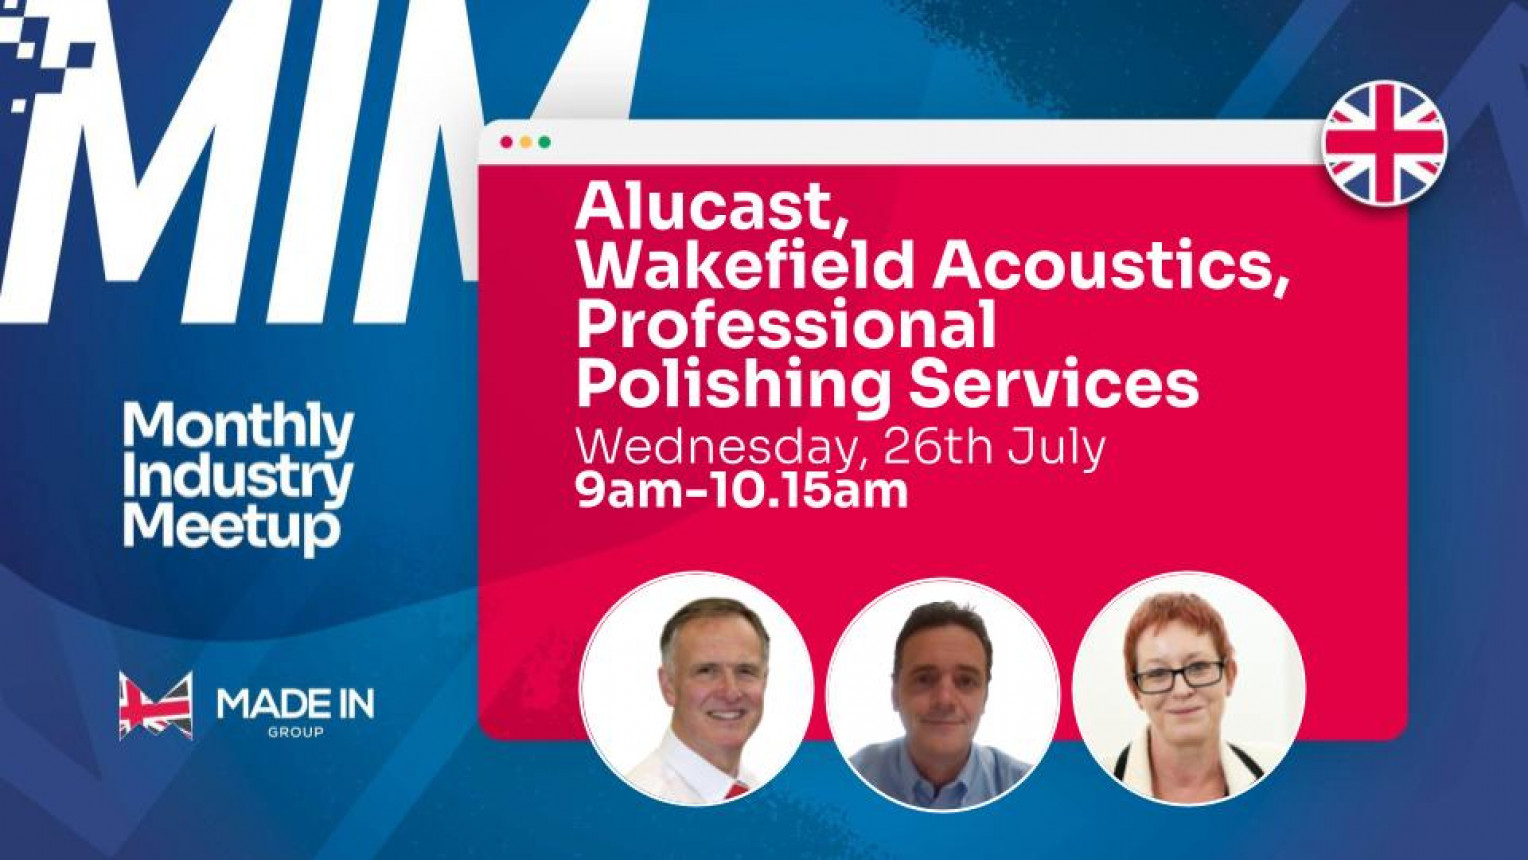 Monthly Industry Meetup with Alucast, Wakefield Acoustics, and Professional Polishing Services